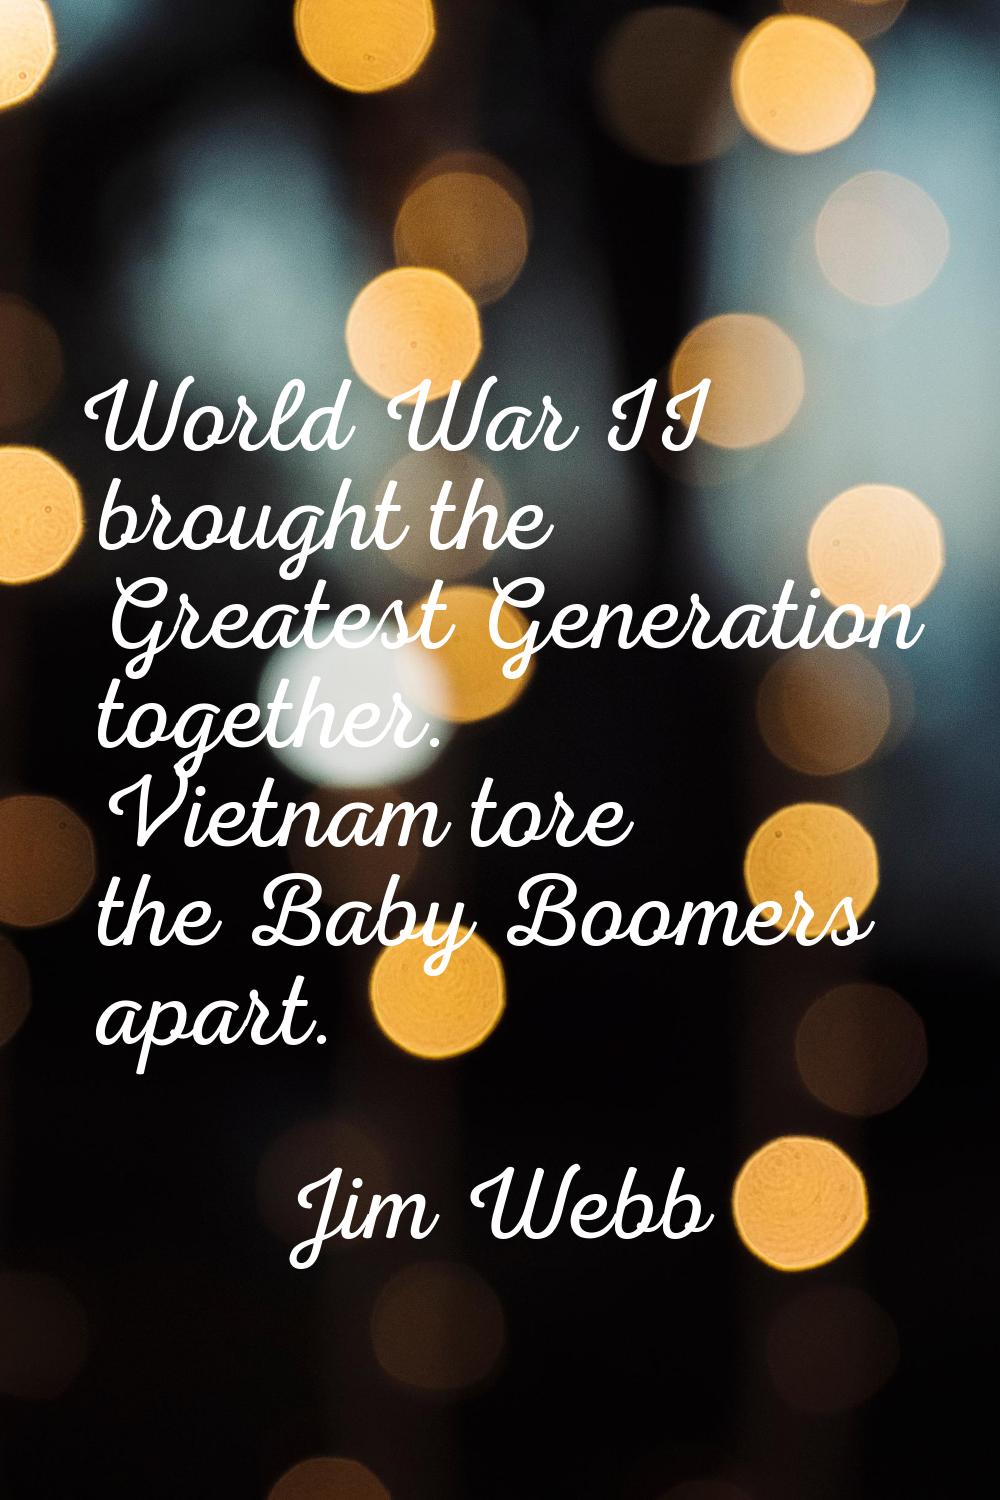 World War II brought the Greatest Generation together. Vietnam tore the Baby Boomers apart.